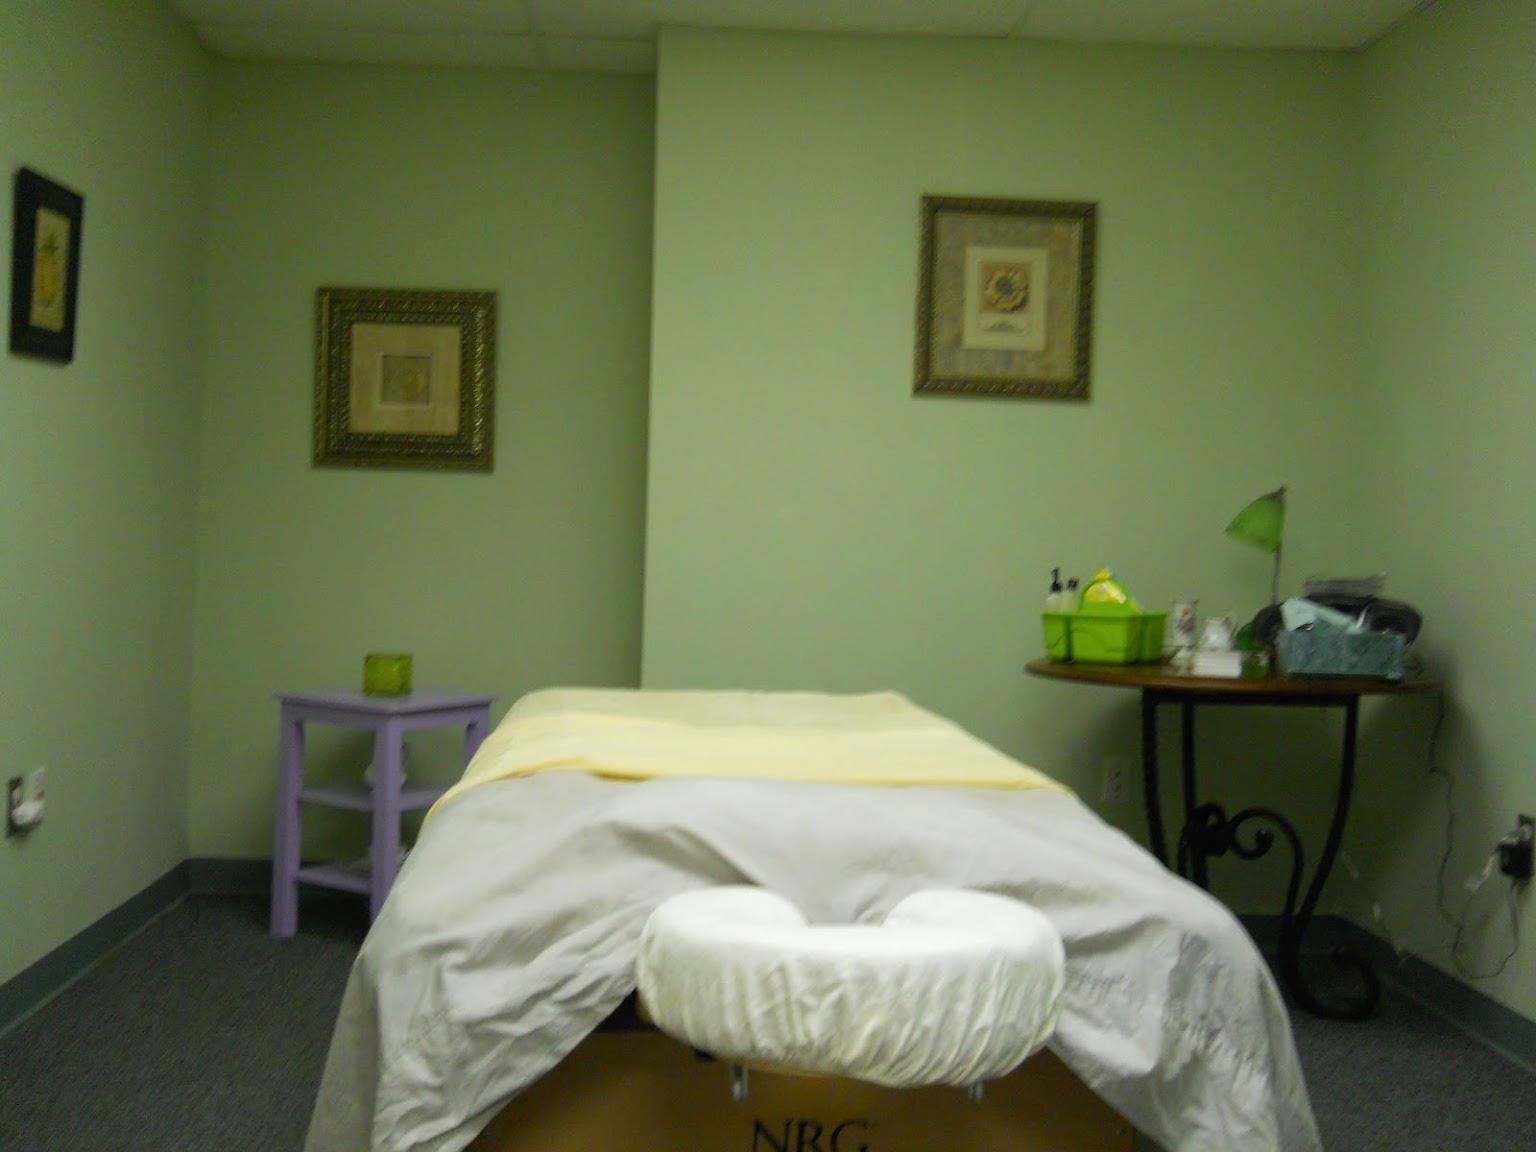 Massage By Heidi Lmt Clinton Twp Mi 48038 N Groesbeck Hwy North Rose St And Reviews